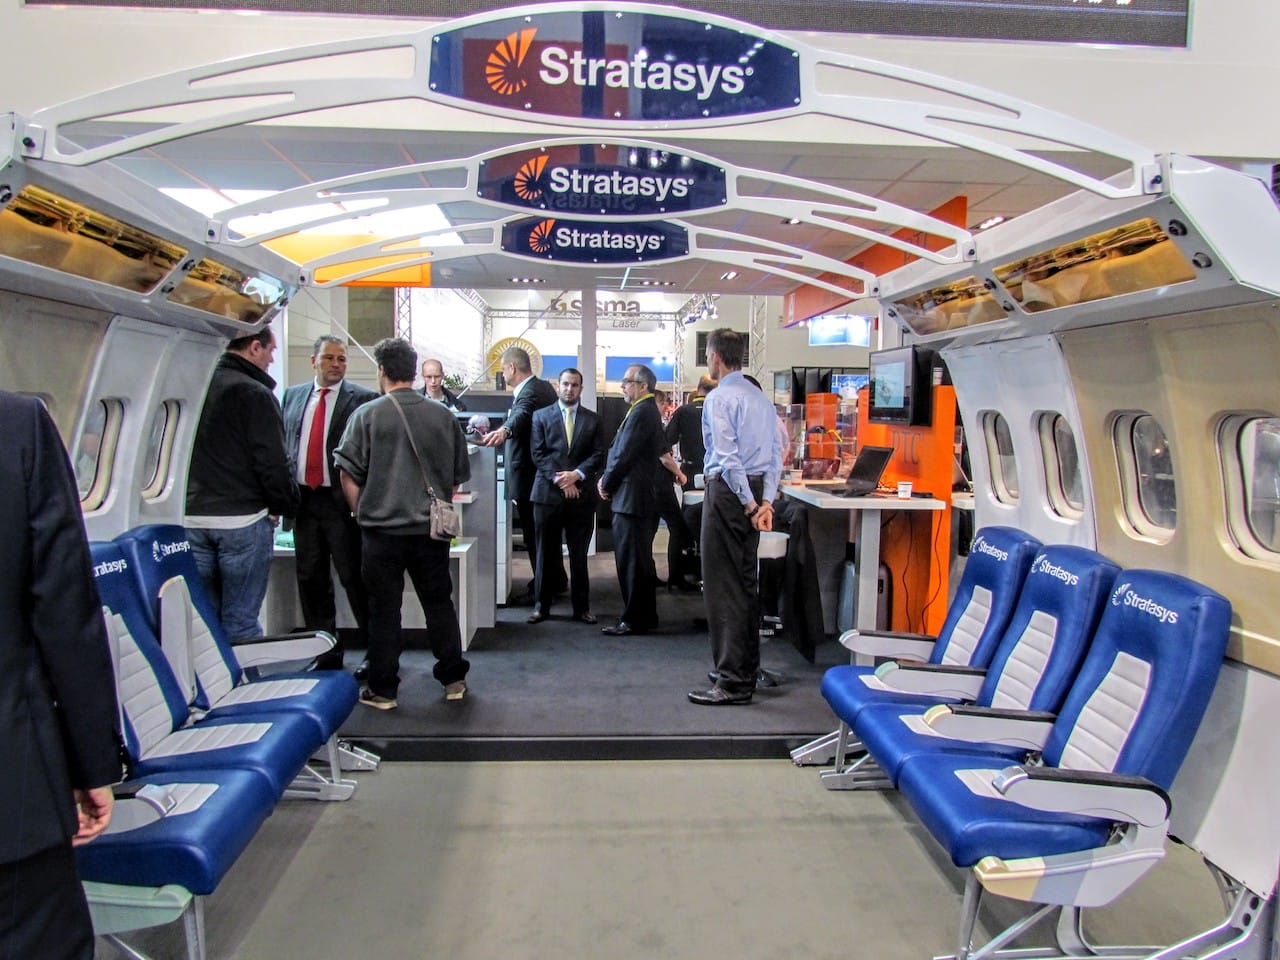  A Stratasys display at a 3D print trade show that looks suspiciously like an airliner 